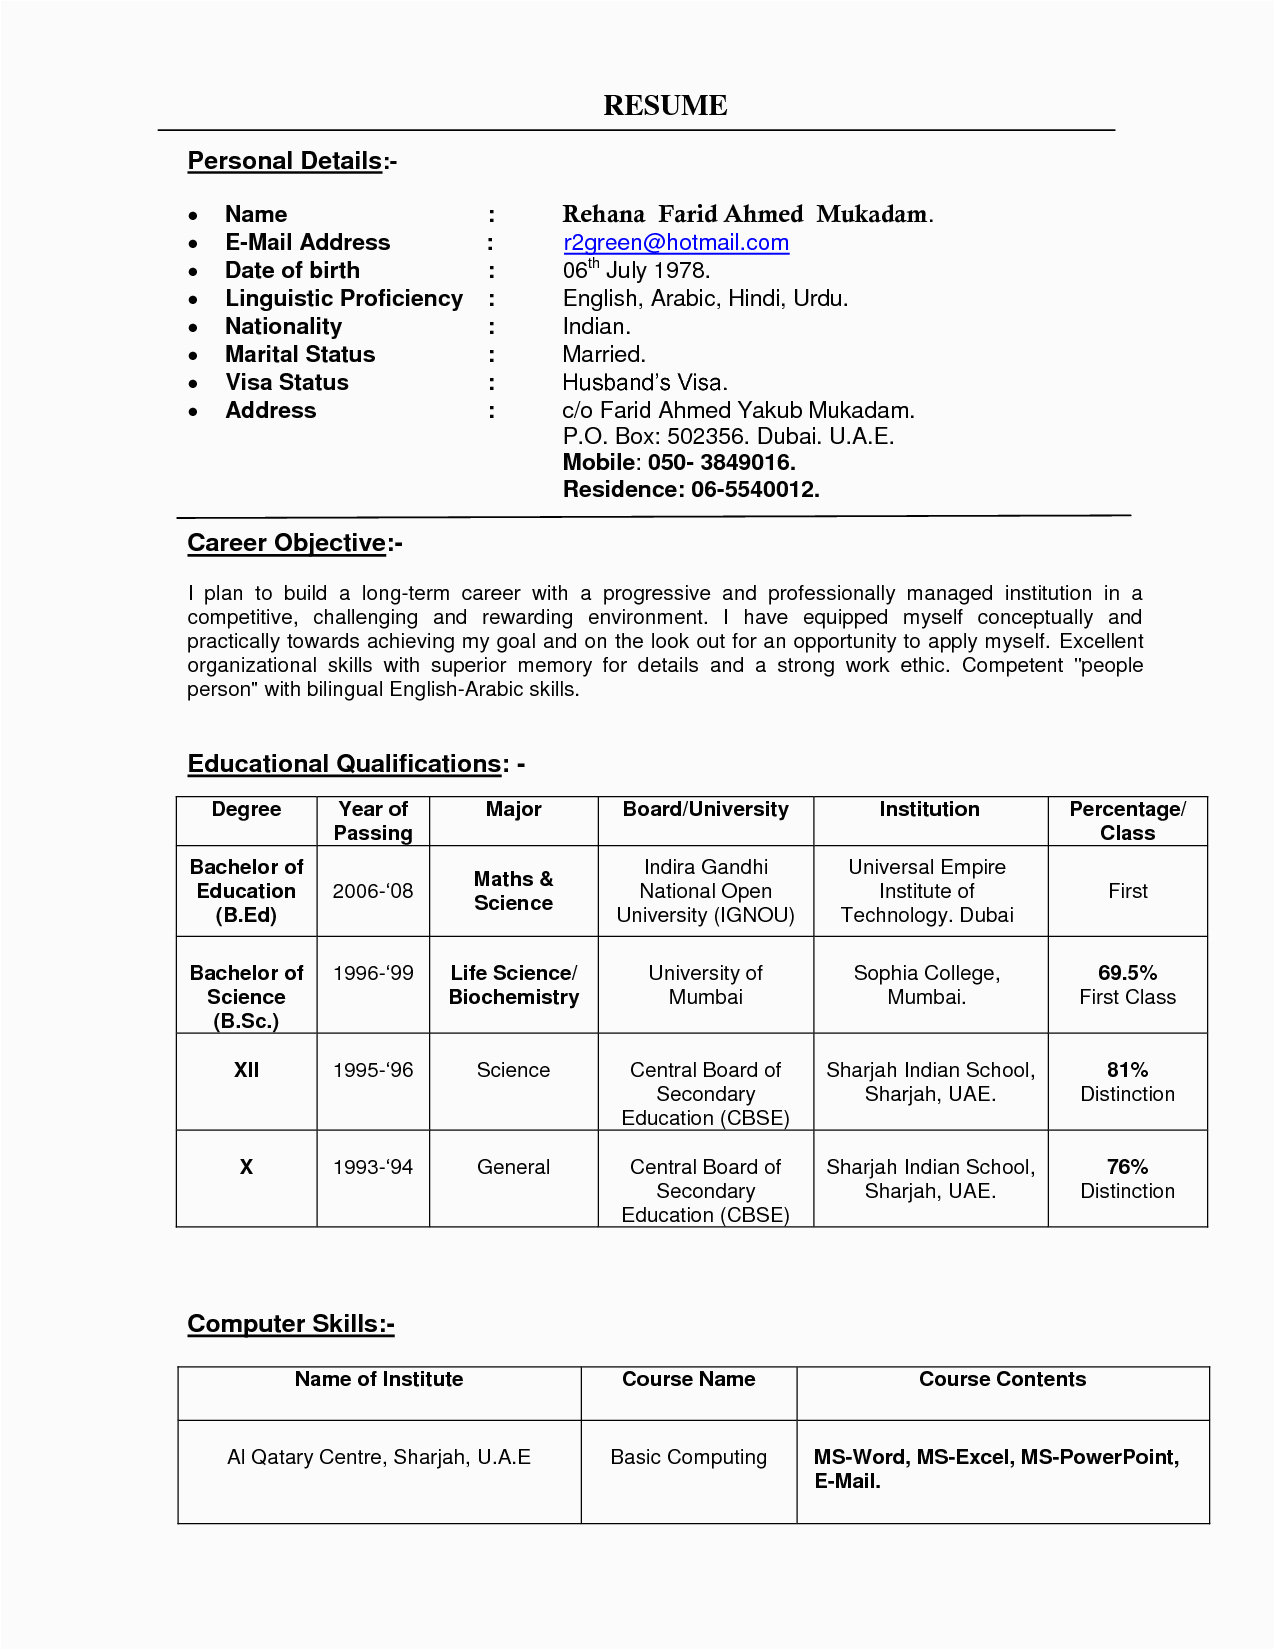 Sample Resume for College Principal In India Resume format Used In India